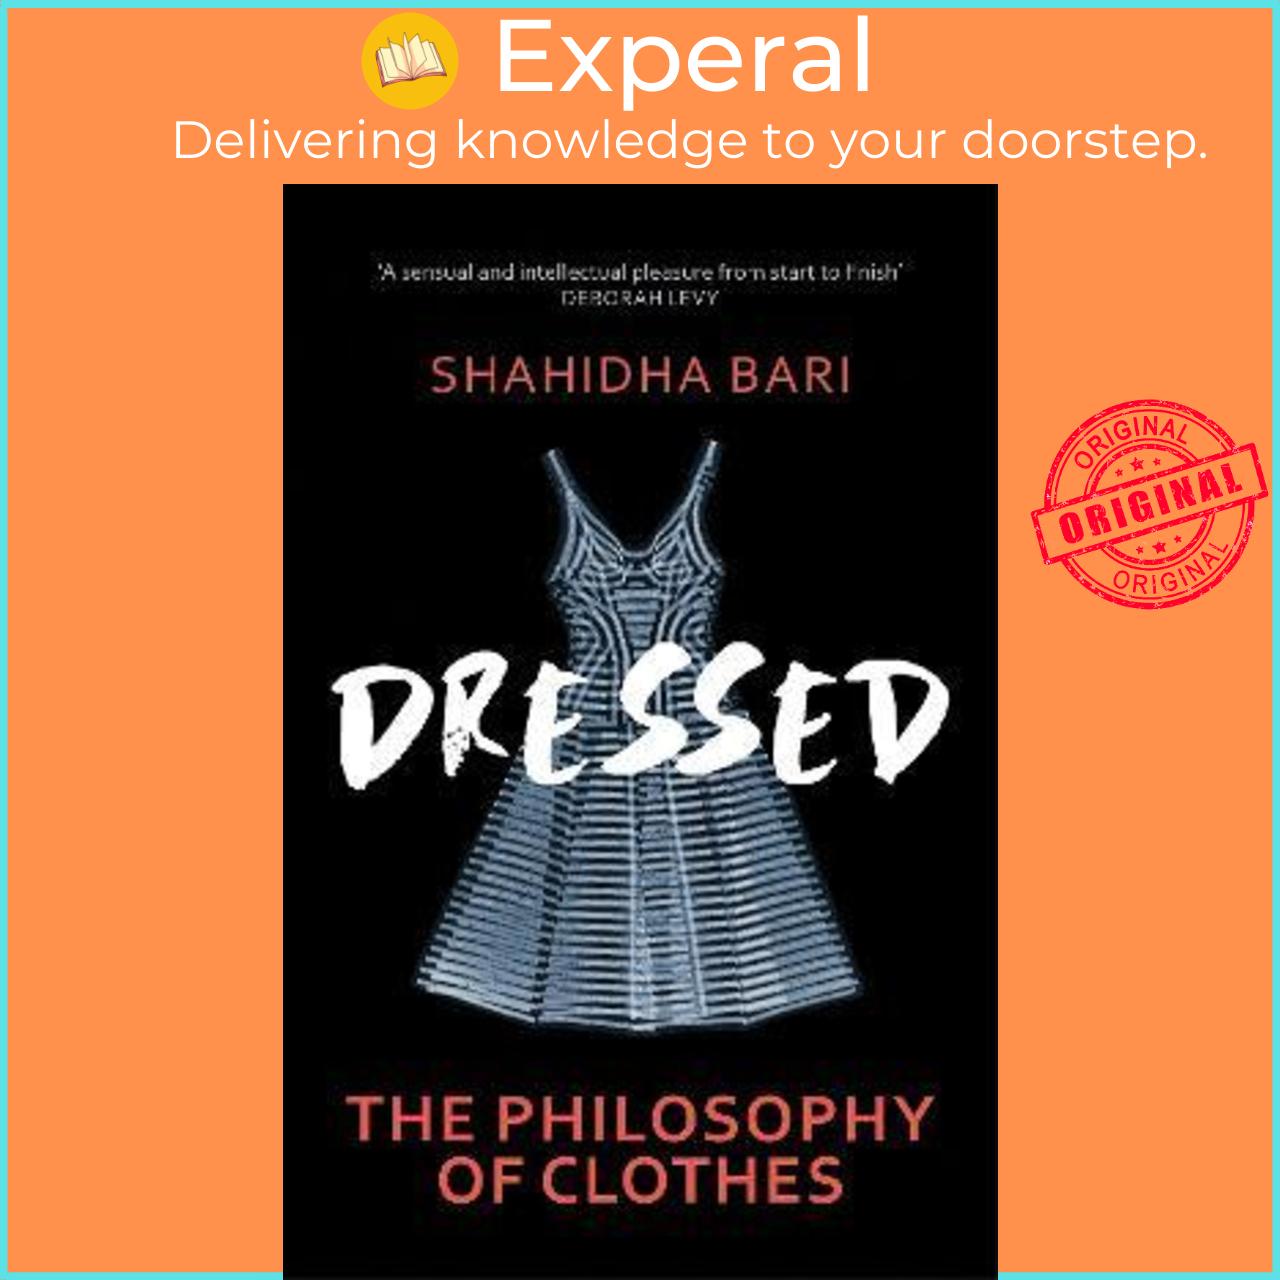 Sách - Dressed : The Philosophy of Clothes by Dr Shahidha Bari (UK edition, paperback)